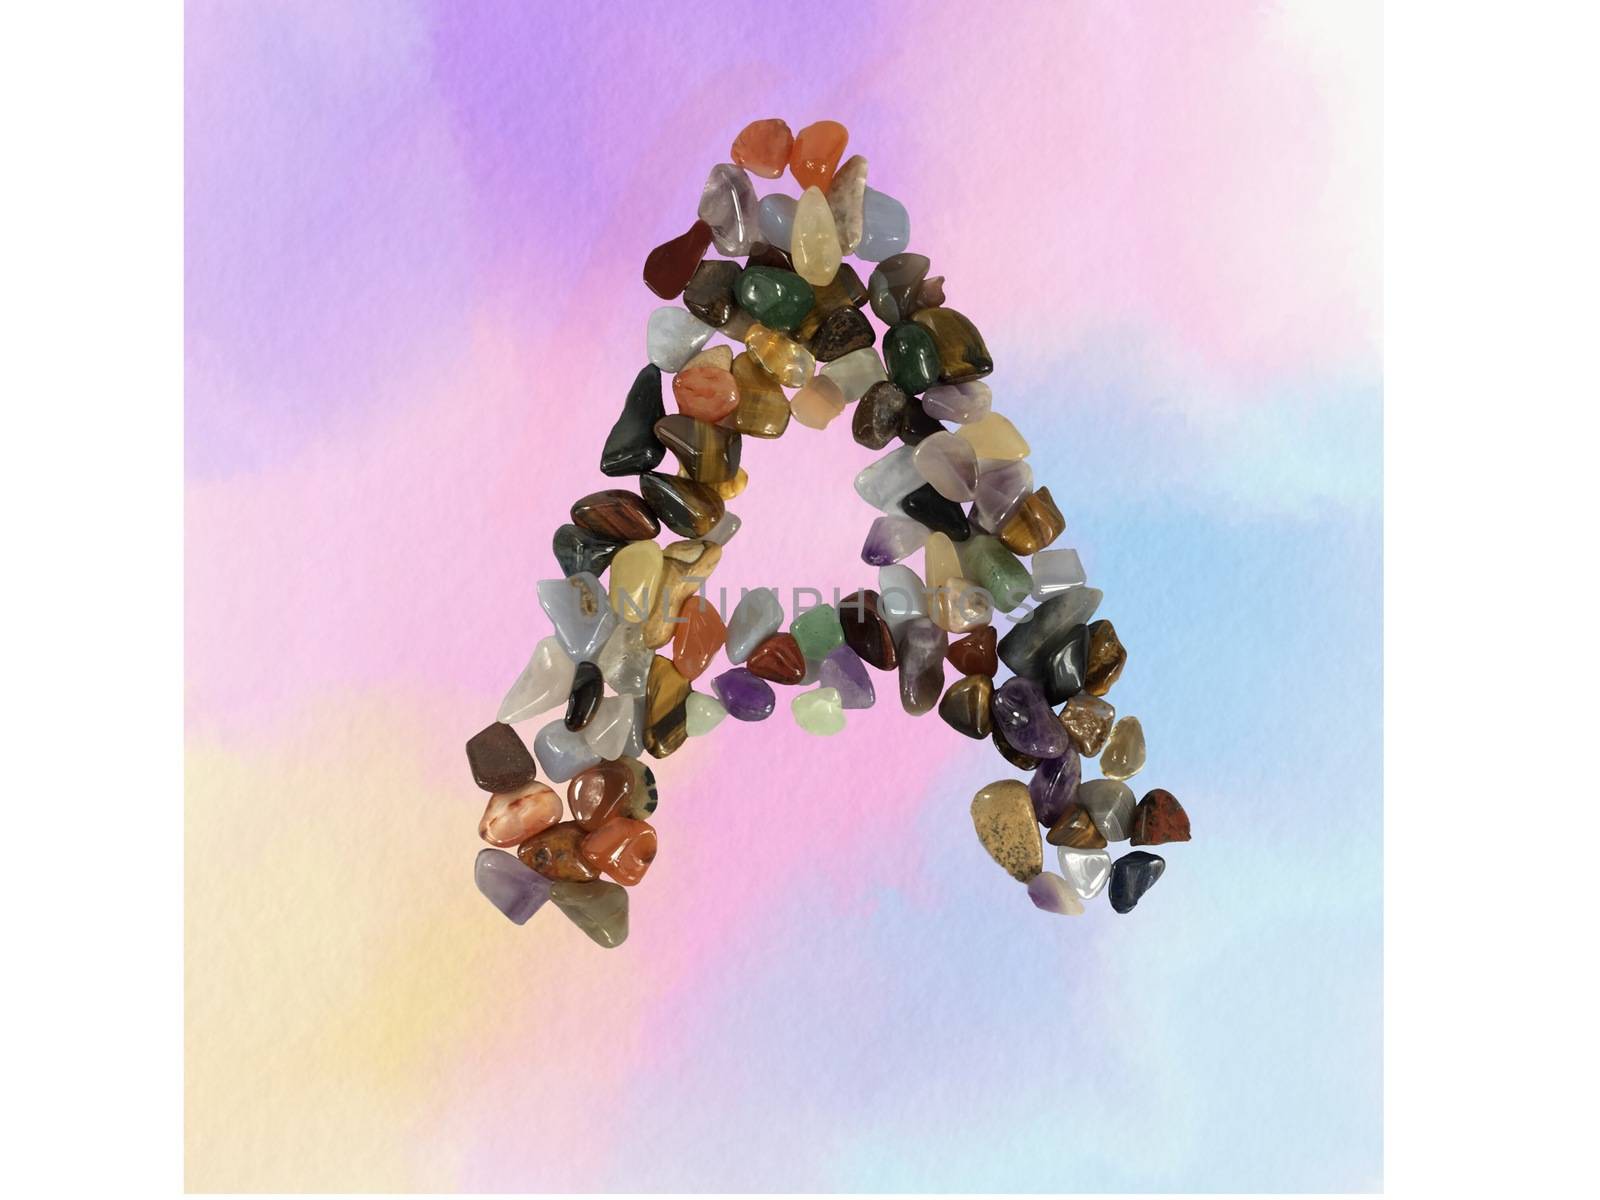 Letter A made of colorful various gemstones  on watercolor background.